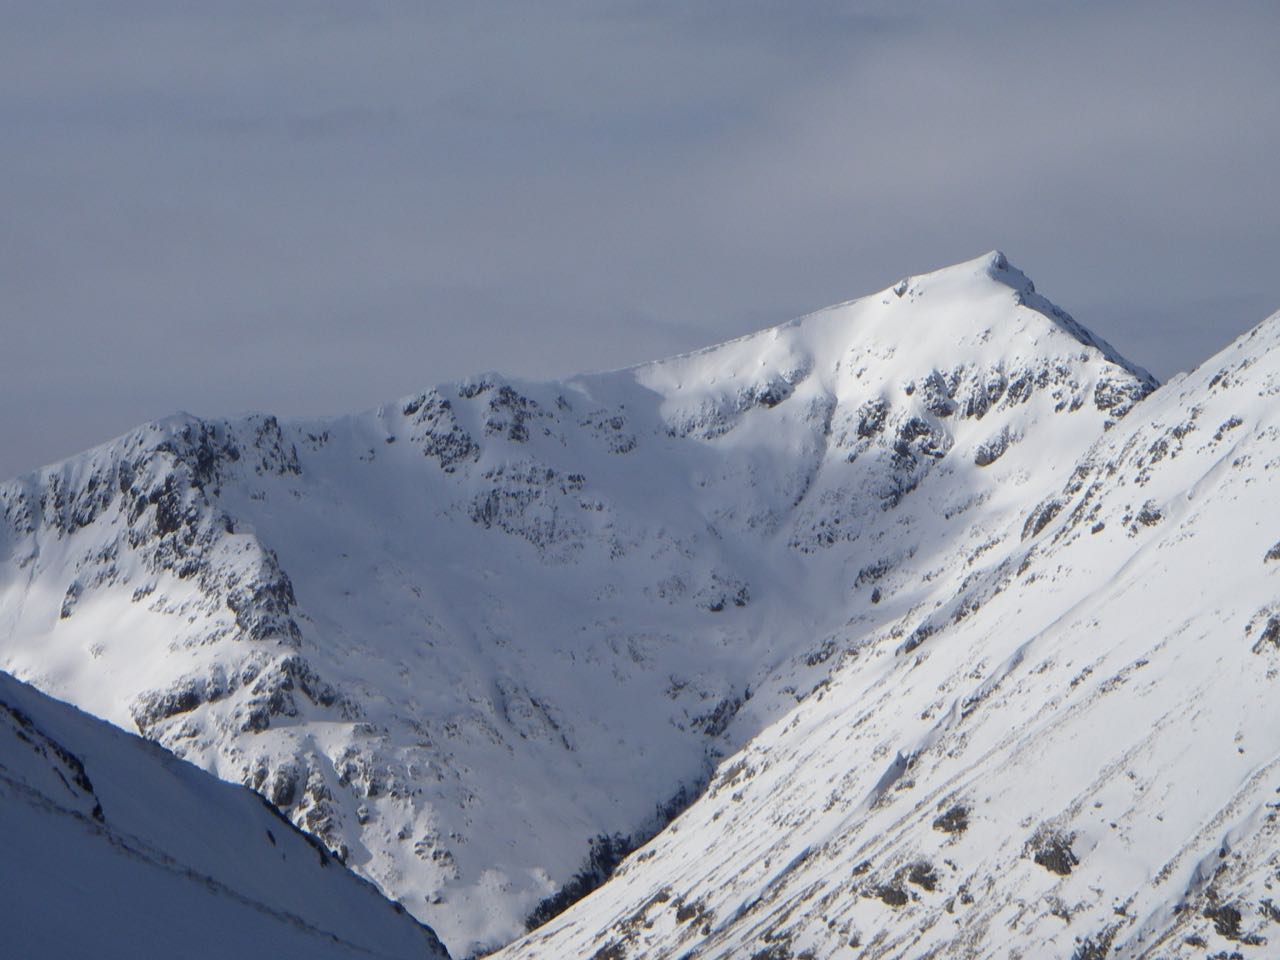 Sron na Lairig (bottom left) and Stob Coire Sgreamhach in the sun